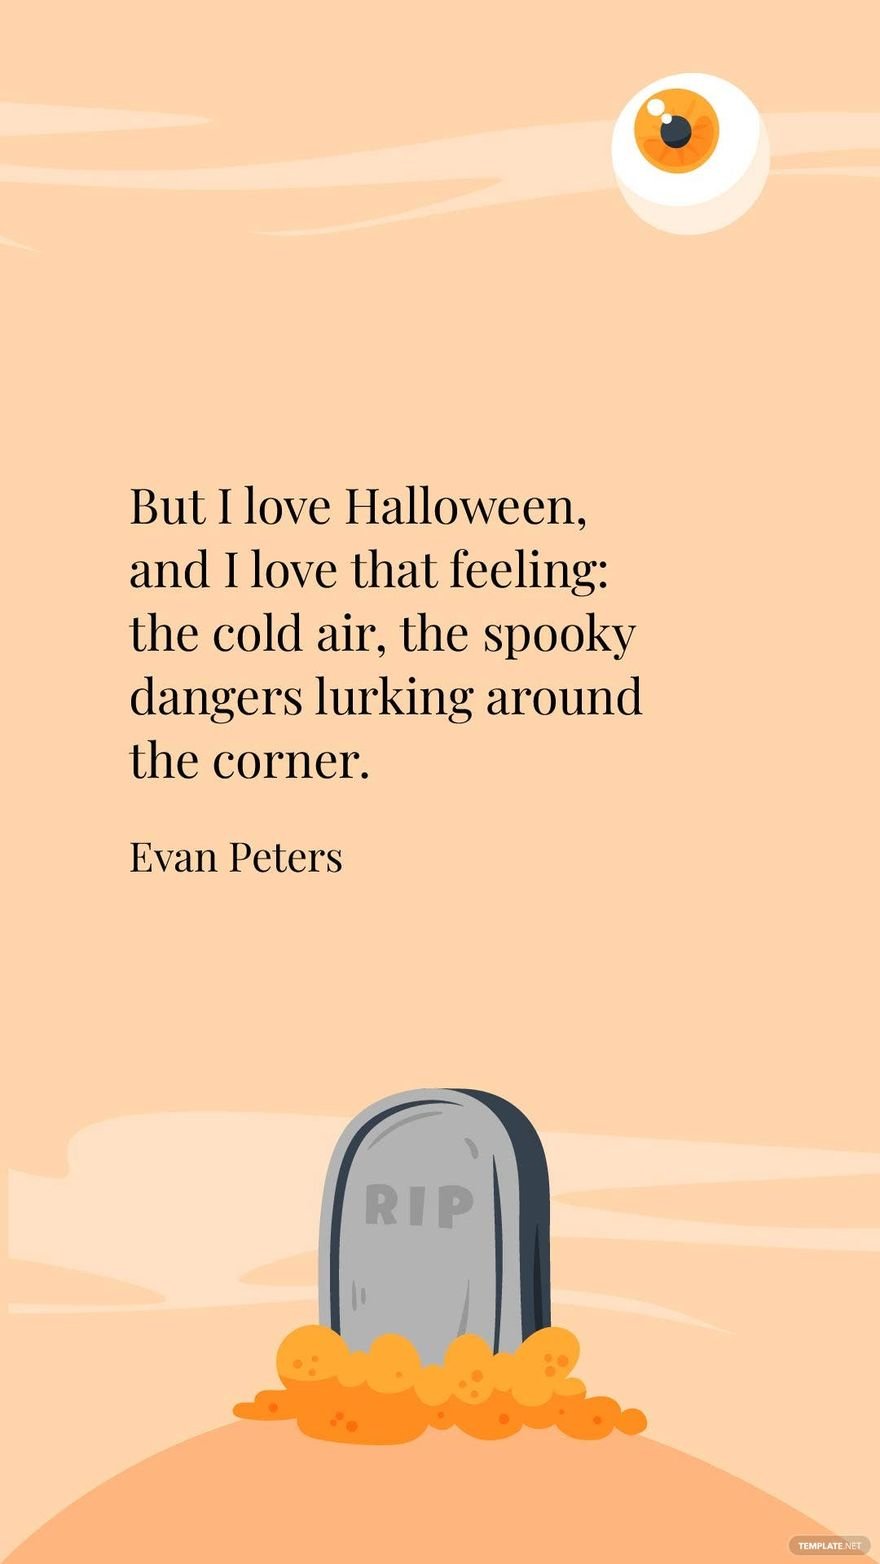 Free Evan Peters- But I love Halloween, and I love that feeling: the cold air, the spooky dangers lurking around the corner.  in JPG